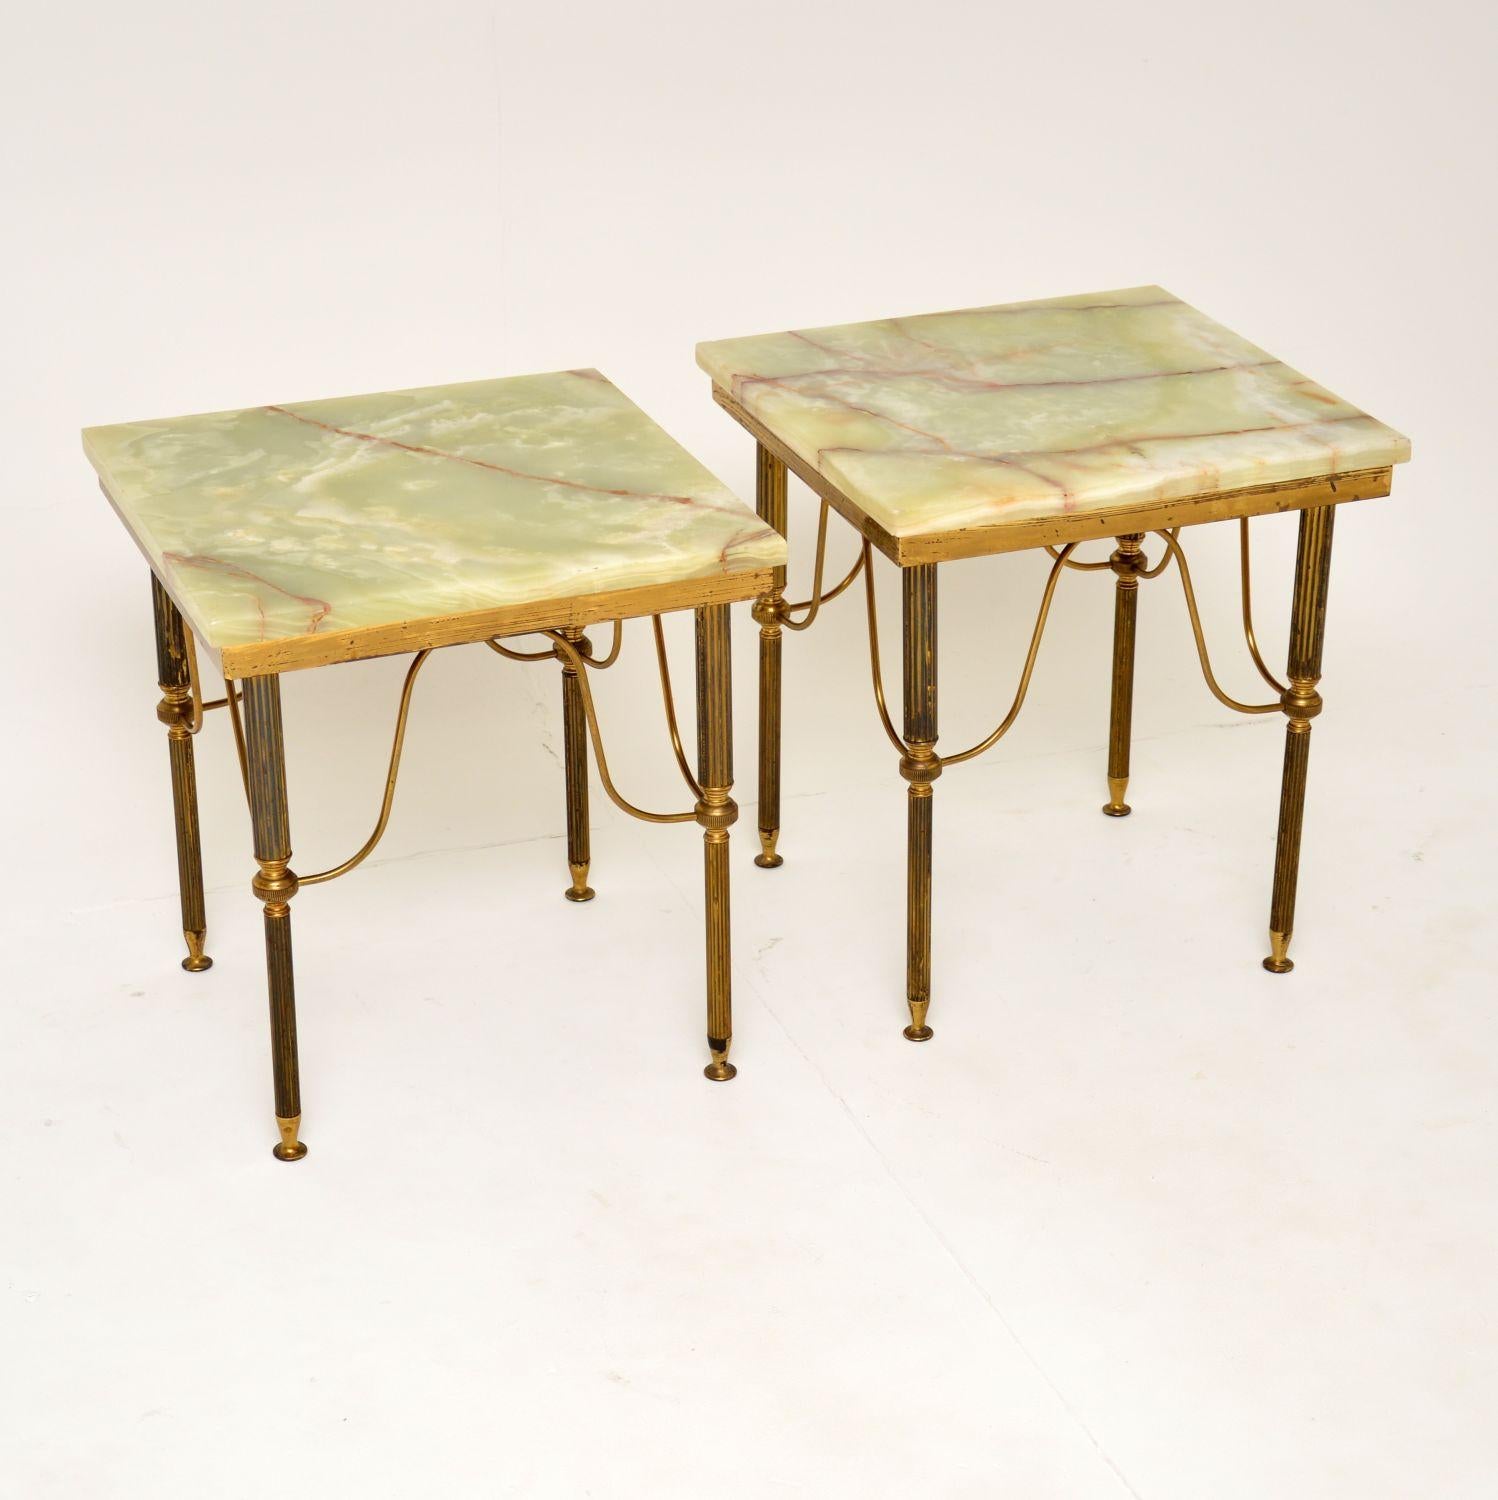 A stylish and extremely well made pair of vintage French Neoclassical style side tables in solid brass, dating from around the 1930-50’s.

The quality is excellent, the brass frames have fluted legs and beautifully shaped supports. The green onyx